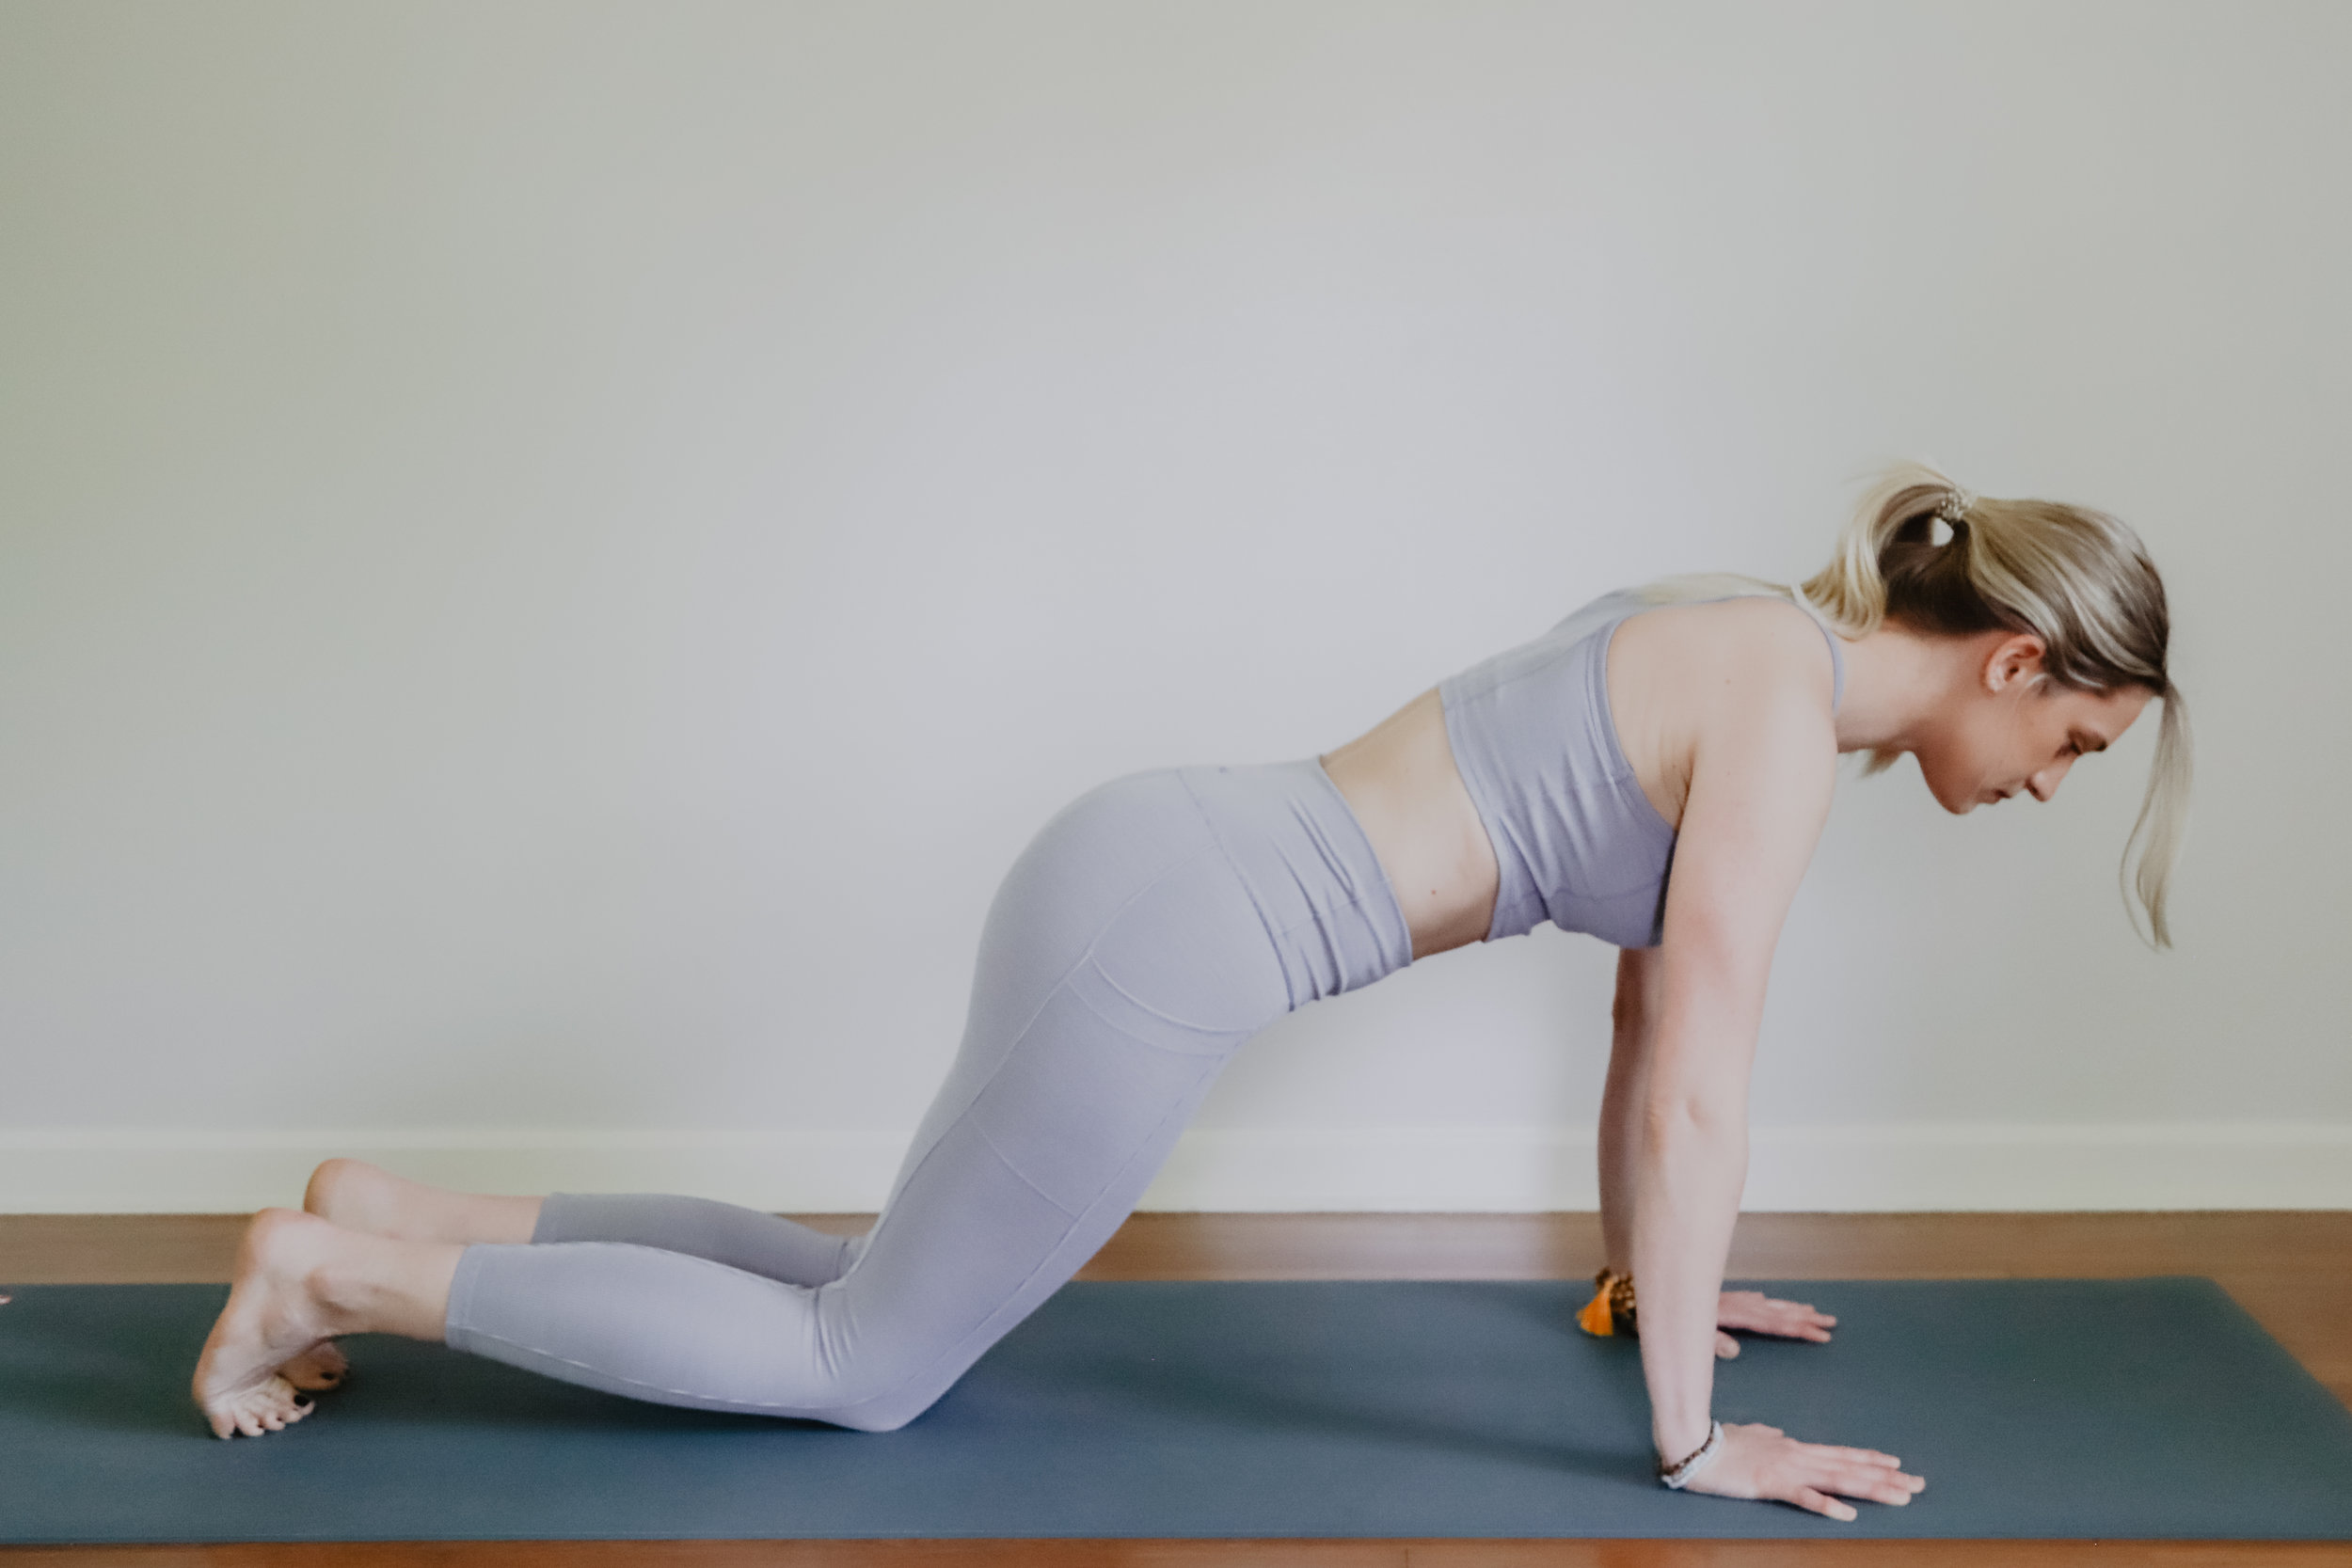 Chaturanga : Top 3 Drills to Build Strength for this Pose - Thrive